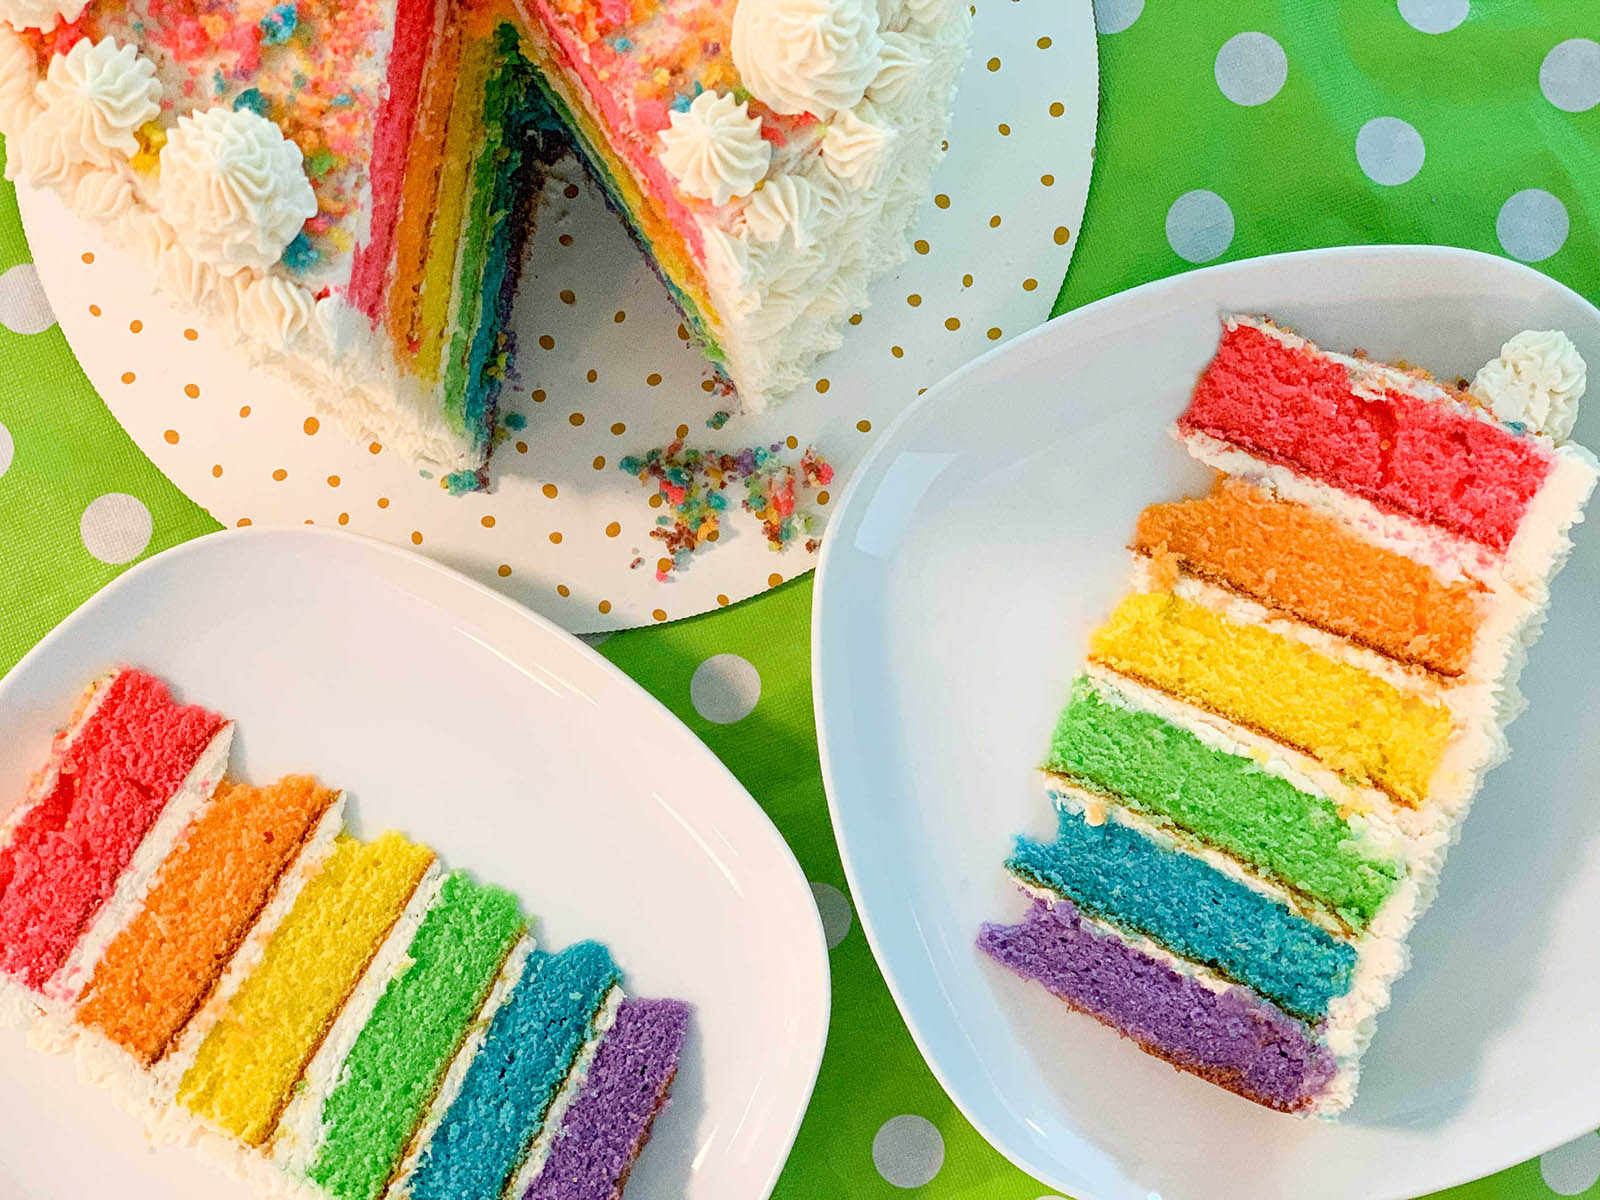 🥘 I Bet We Can Guess Your Age Based on the Food You’d Rather Eat Rainbow layer cake